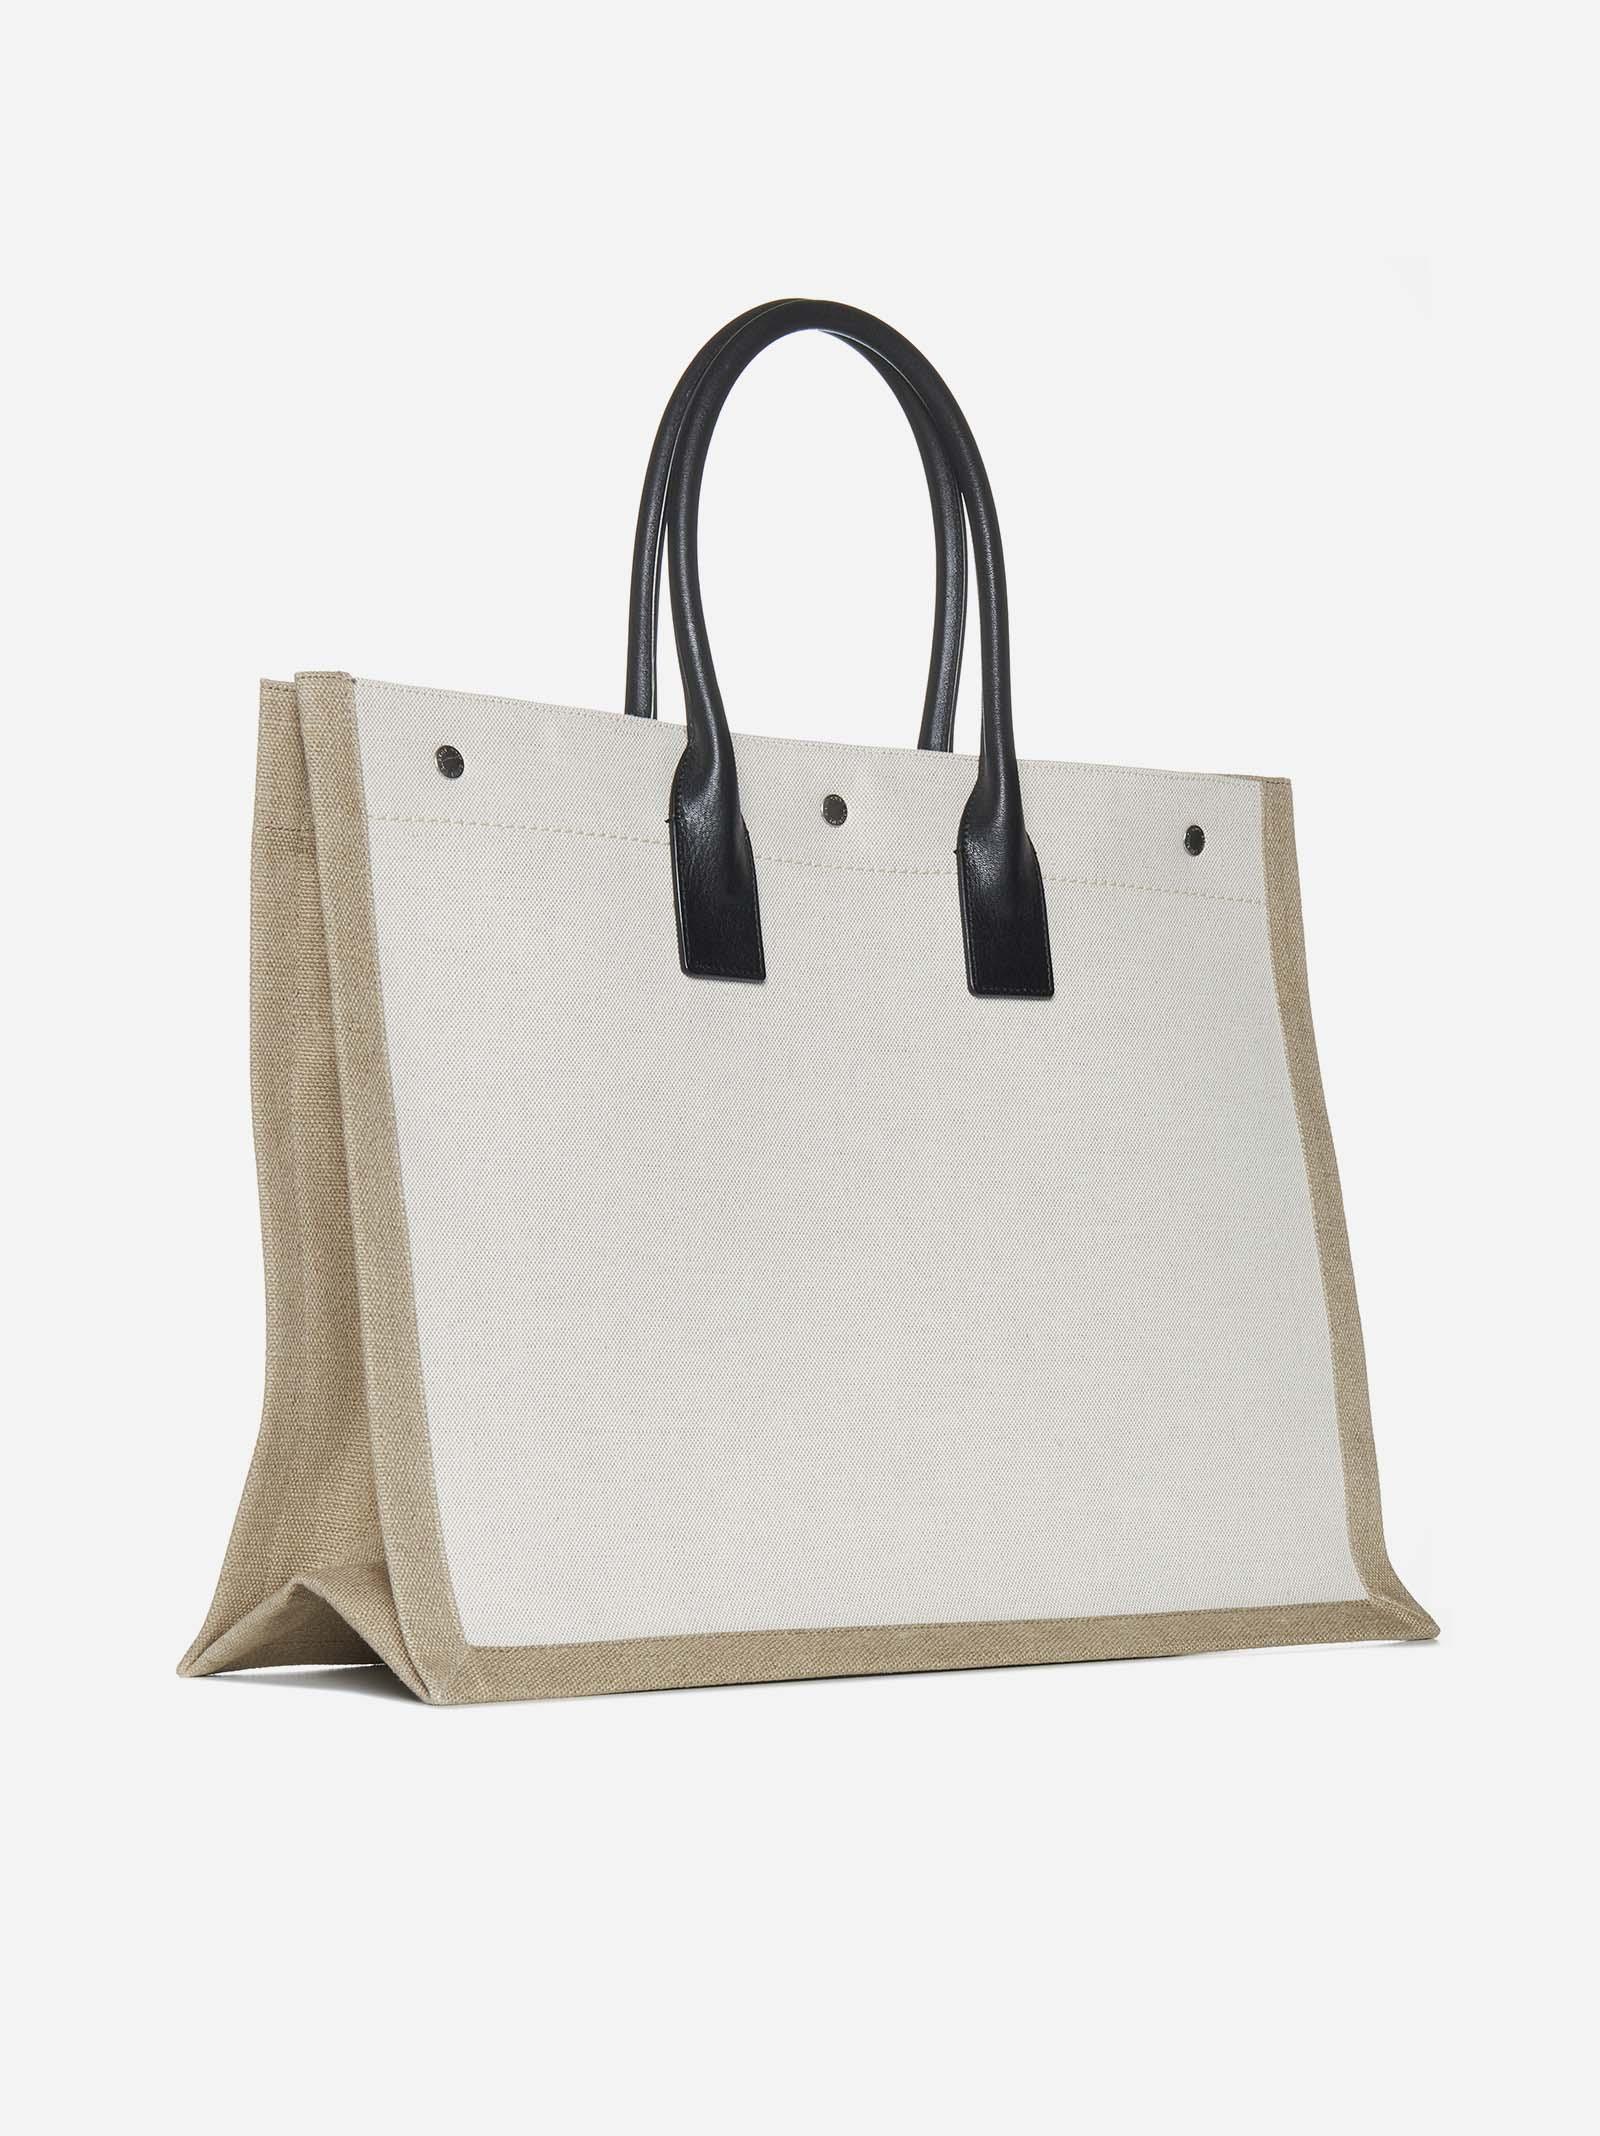 Saint Laurent Rive Gauche Cotton And Linen Tote Bag in Natural for